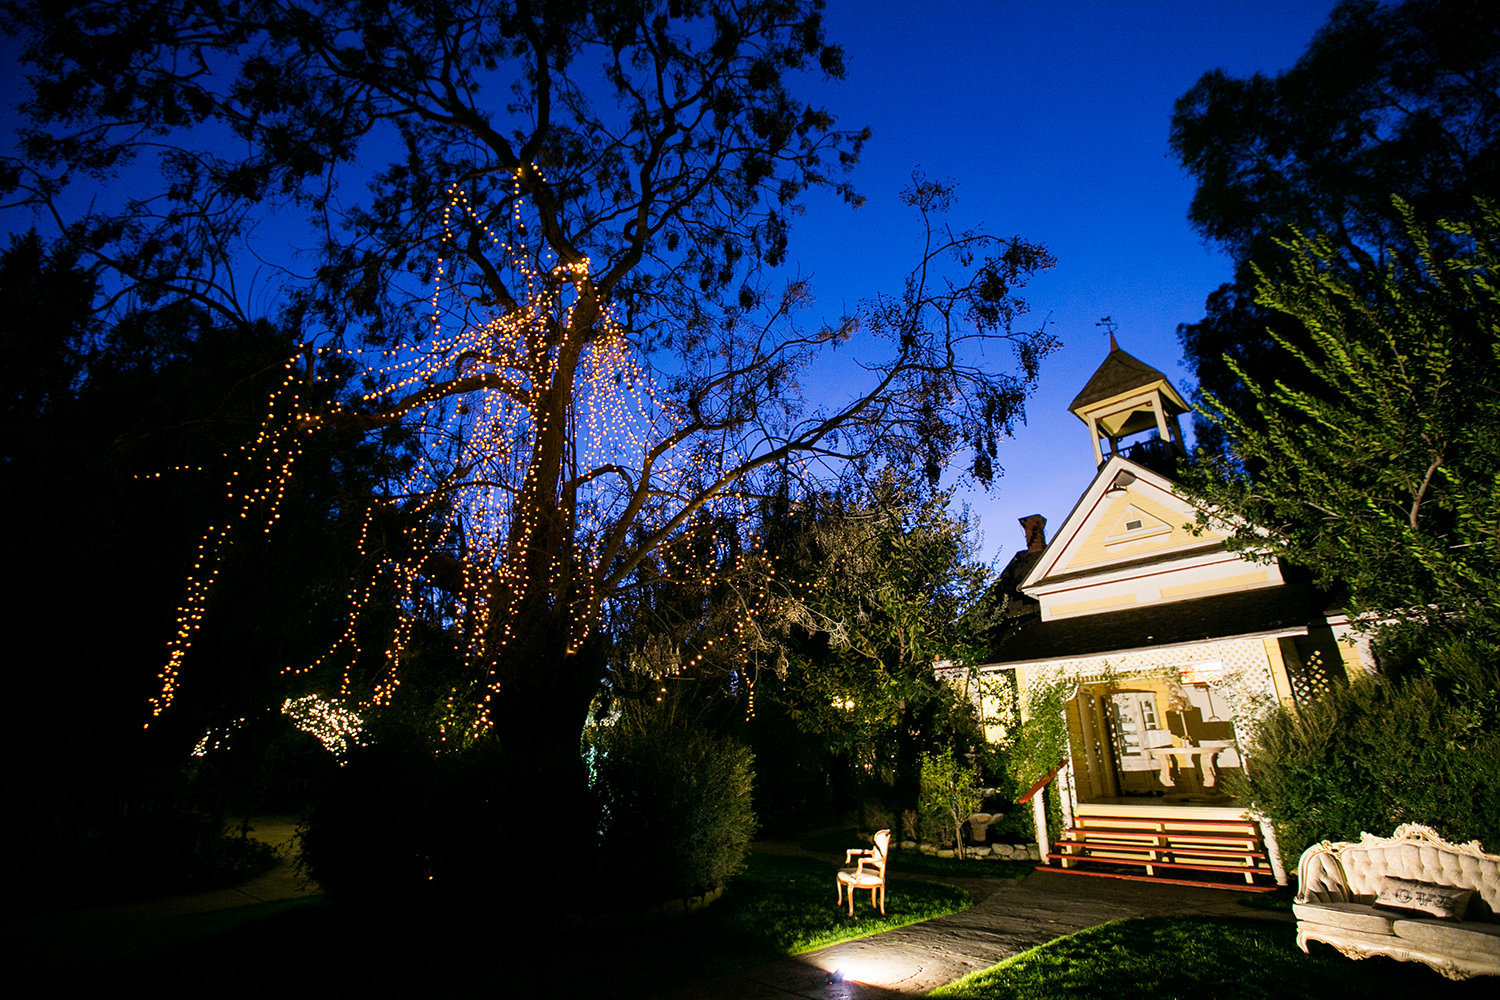 Twin Oaks Schoolhouse lit up at night